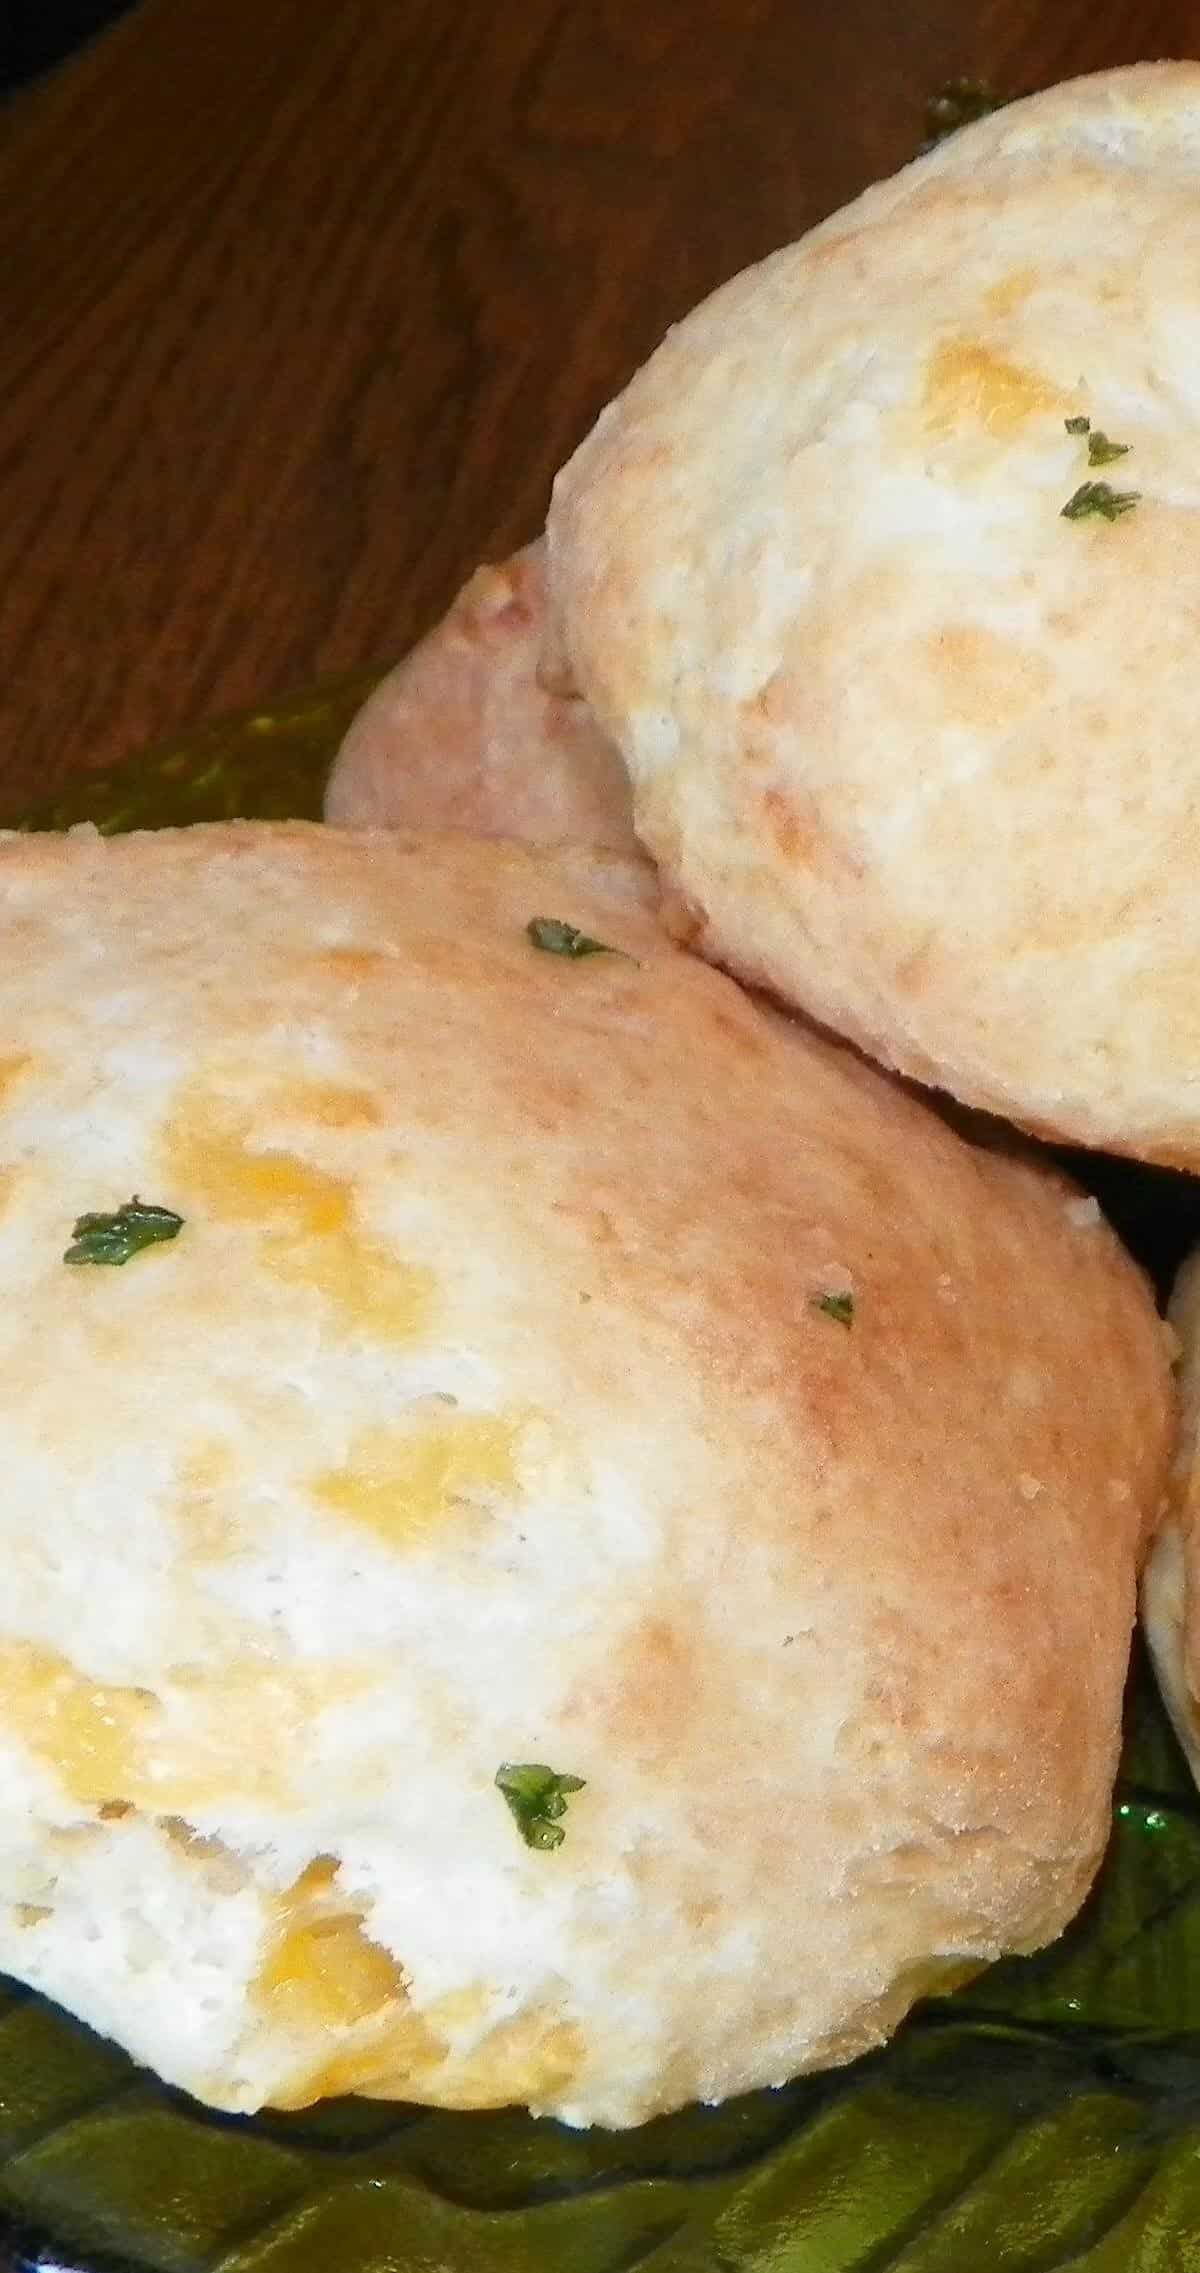  Bite into a taste of the sea with these cheesy Cheddar Bay Biscuits!